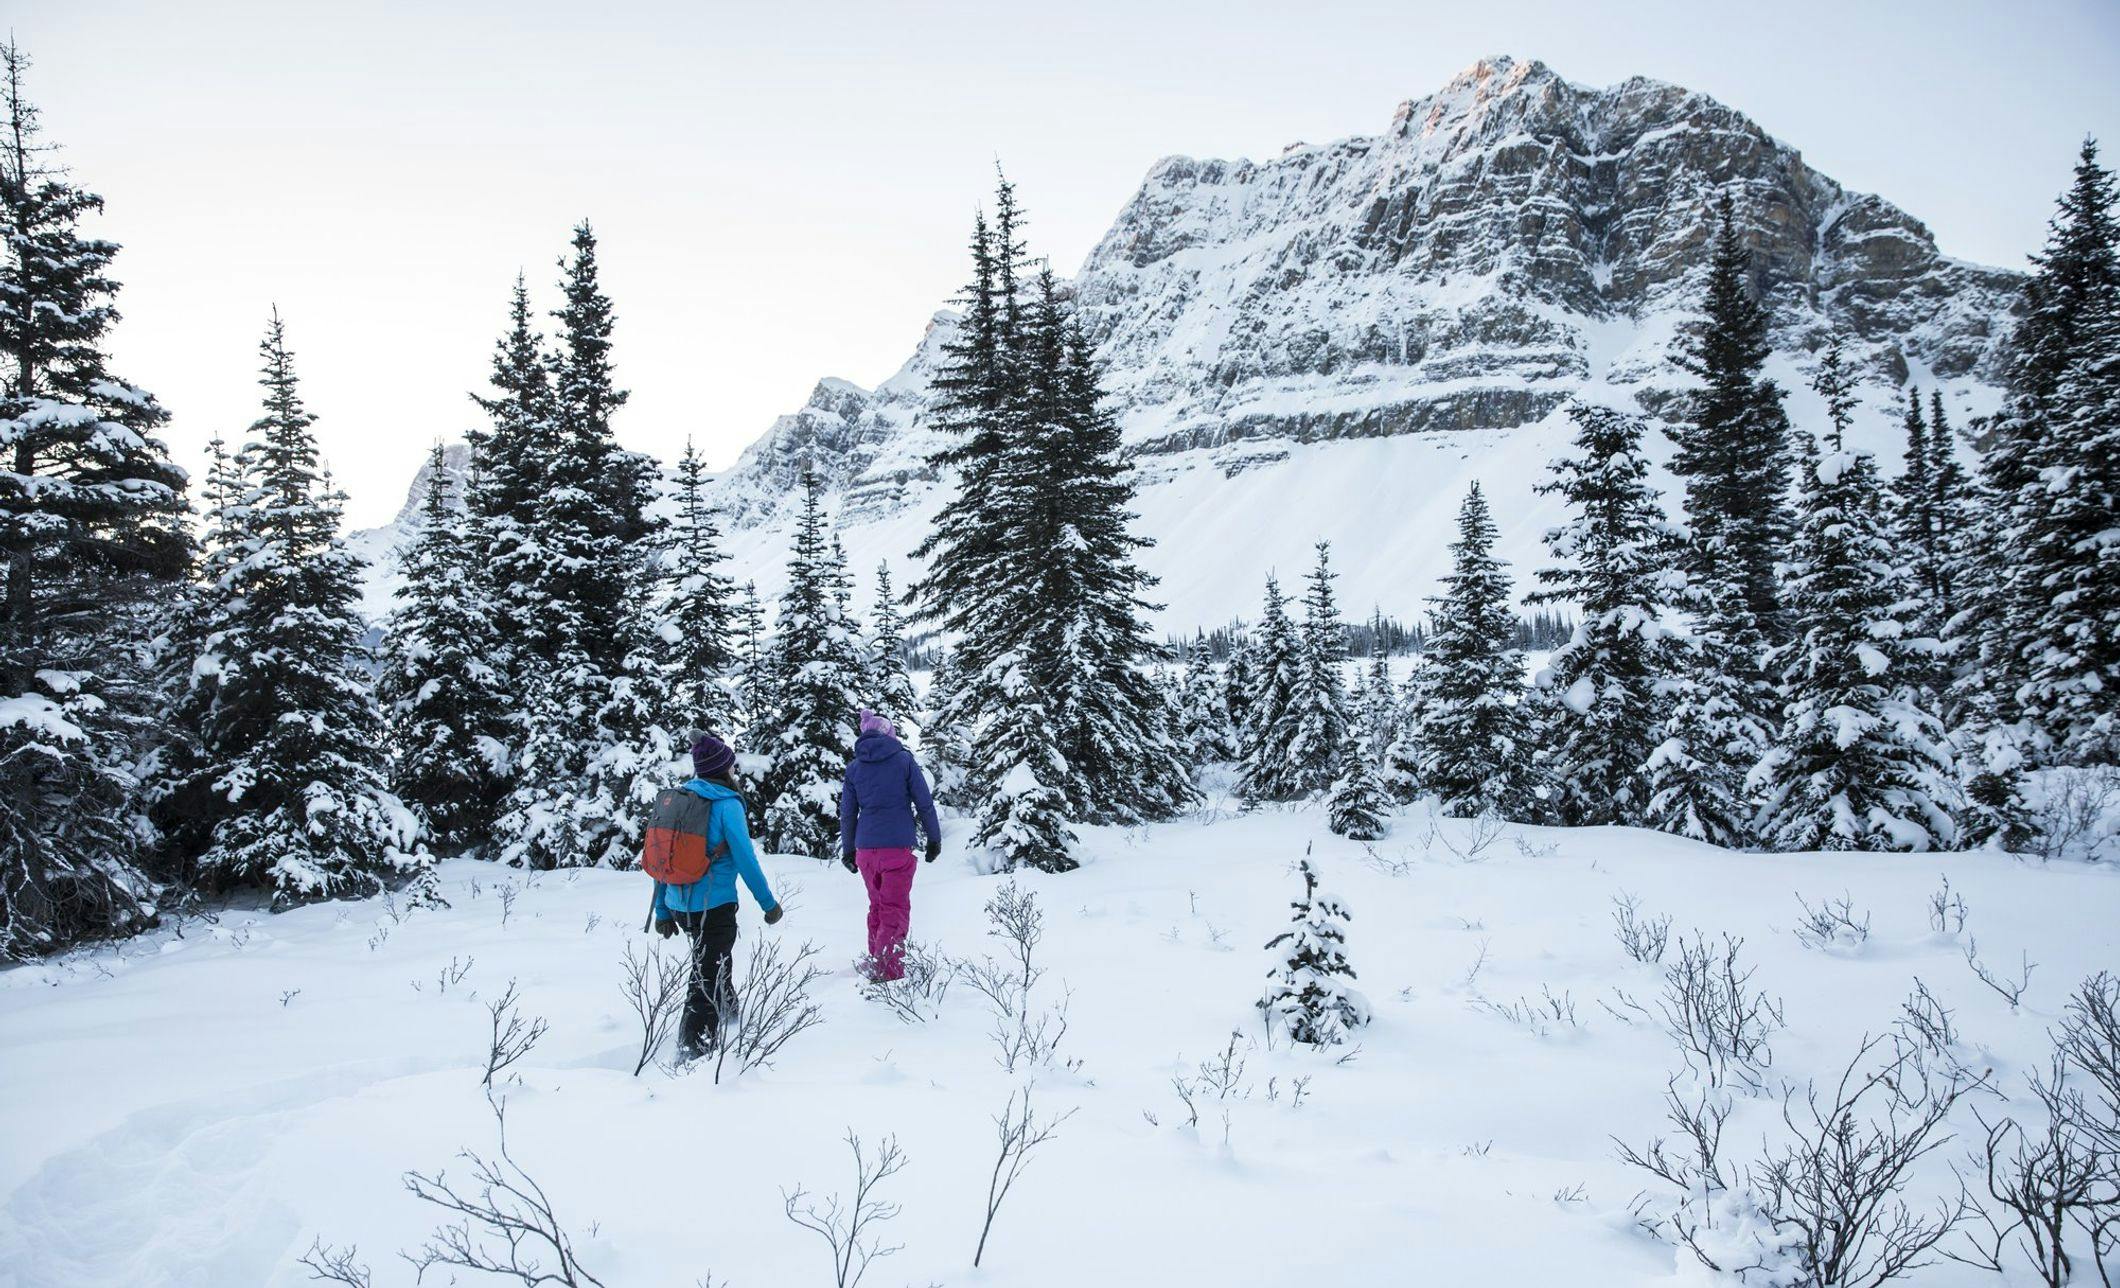 A couple snowshoeing through deep snow towards a wintery forest with mountains ahead of them